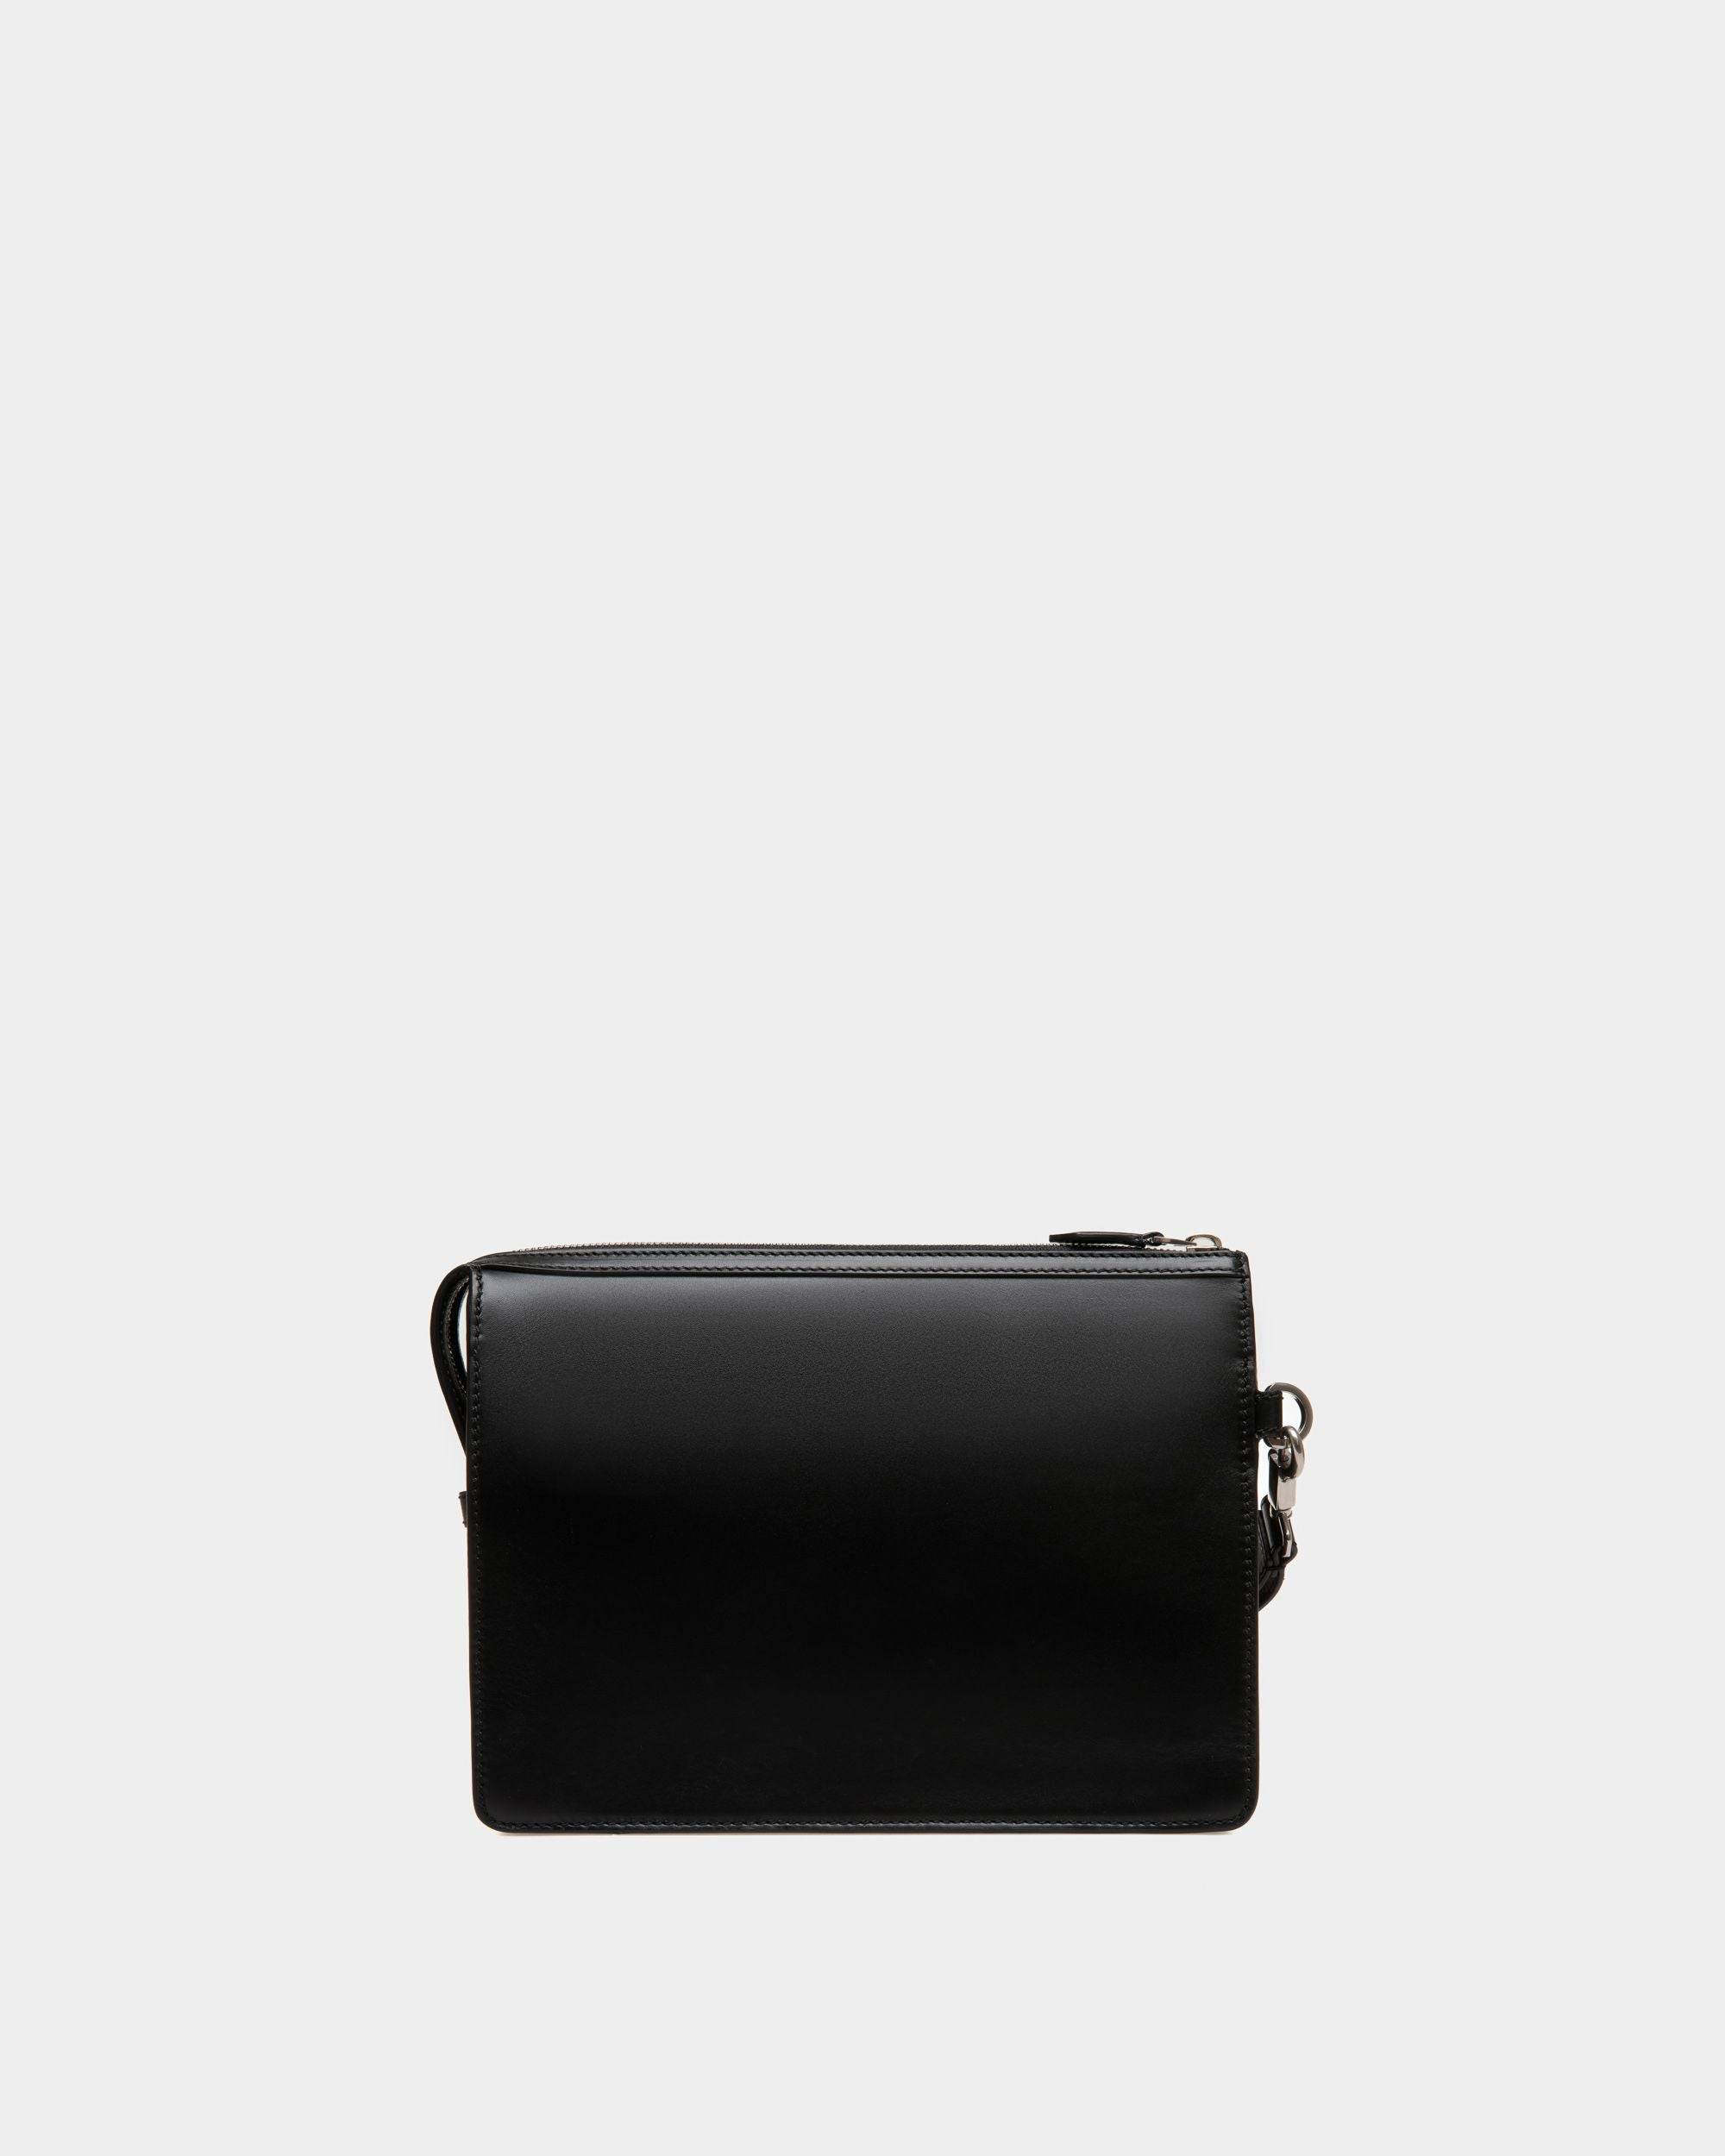 Busy Bally | Men's Pouch in Black Leather | Bally | Still Life Back